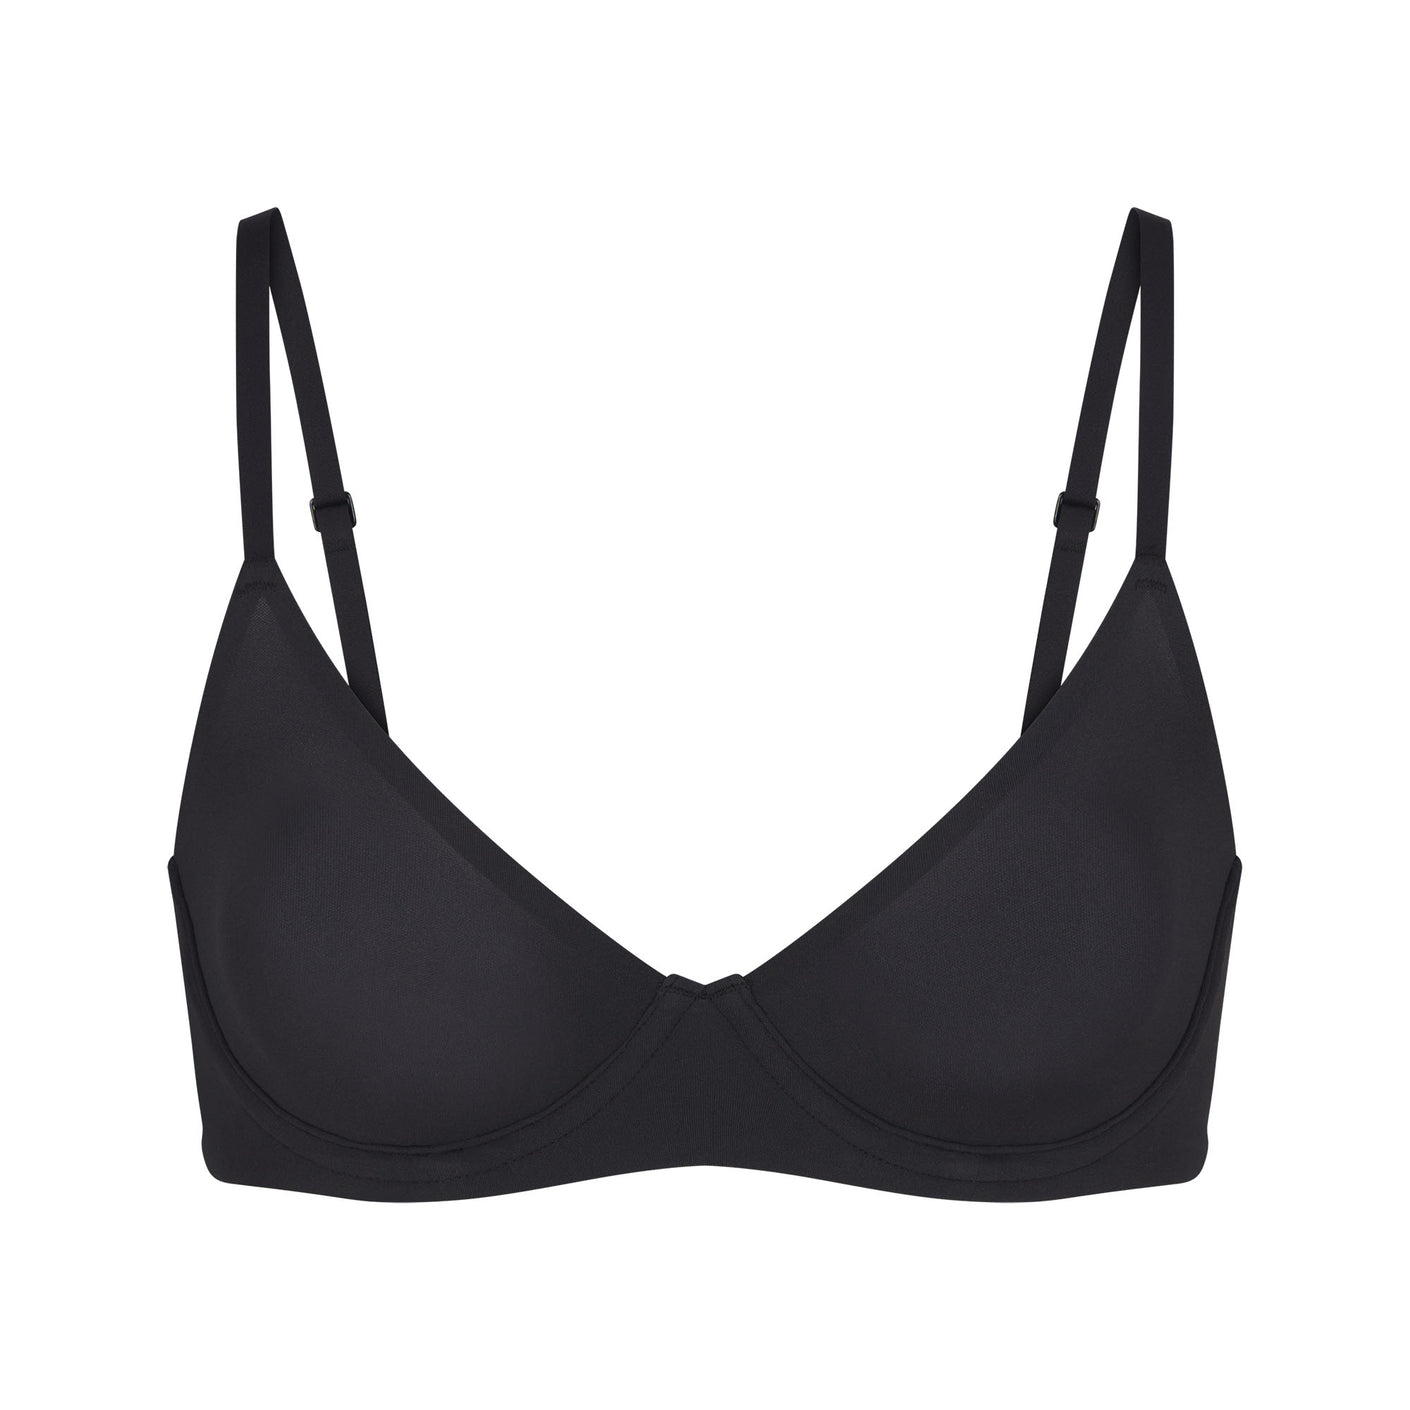 Black After Hours Bra by SKIMS on Sale